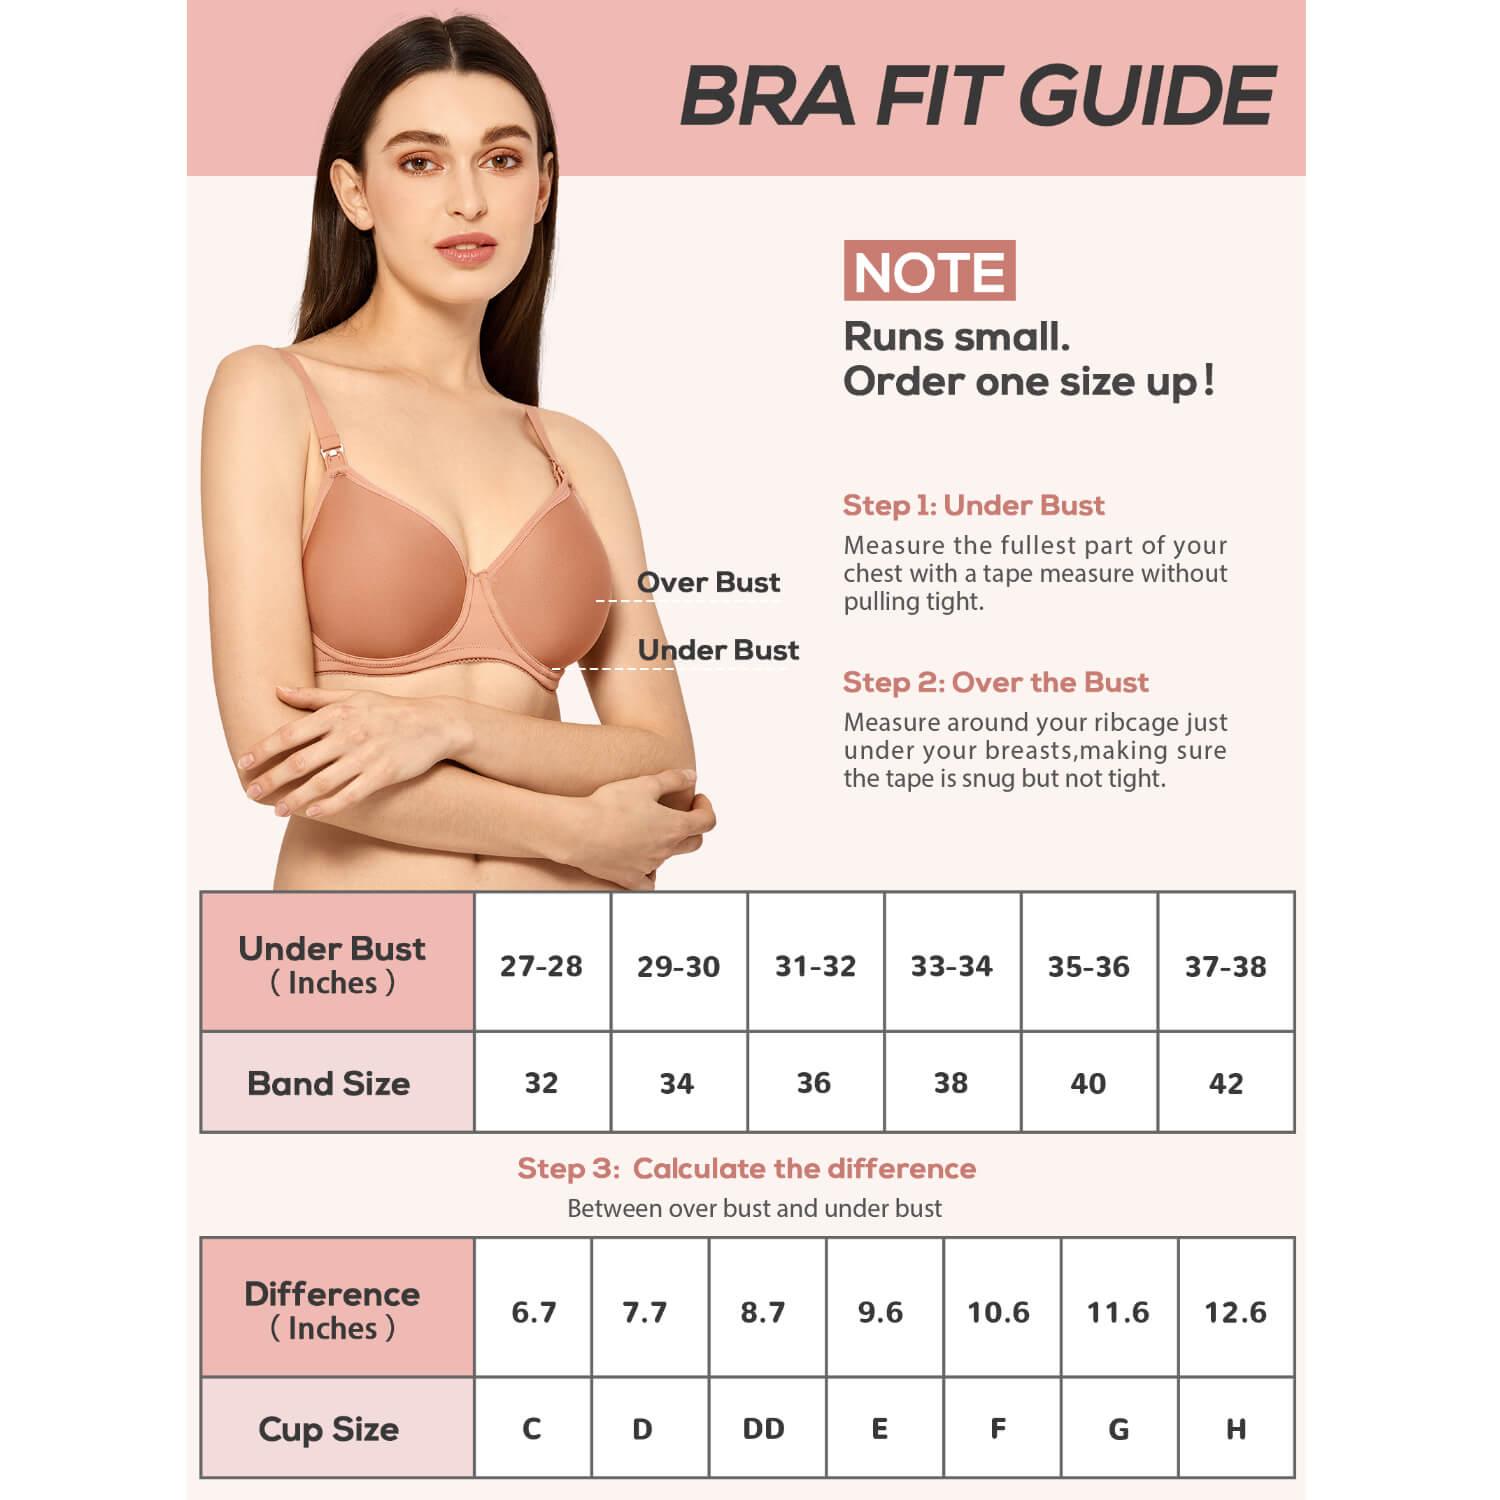 Unlined Seamless Bras 38A, Bras for Large Breasts